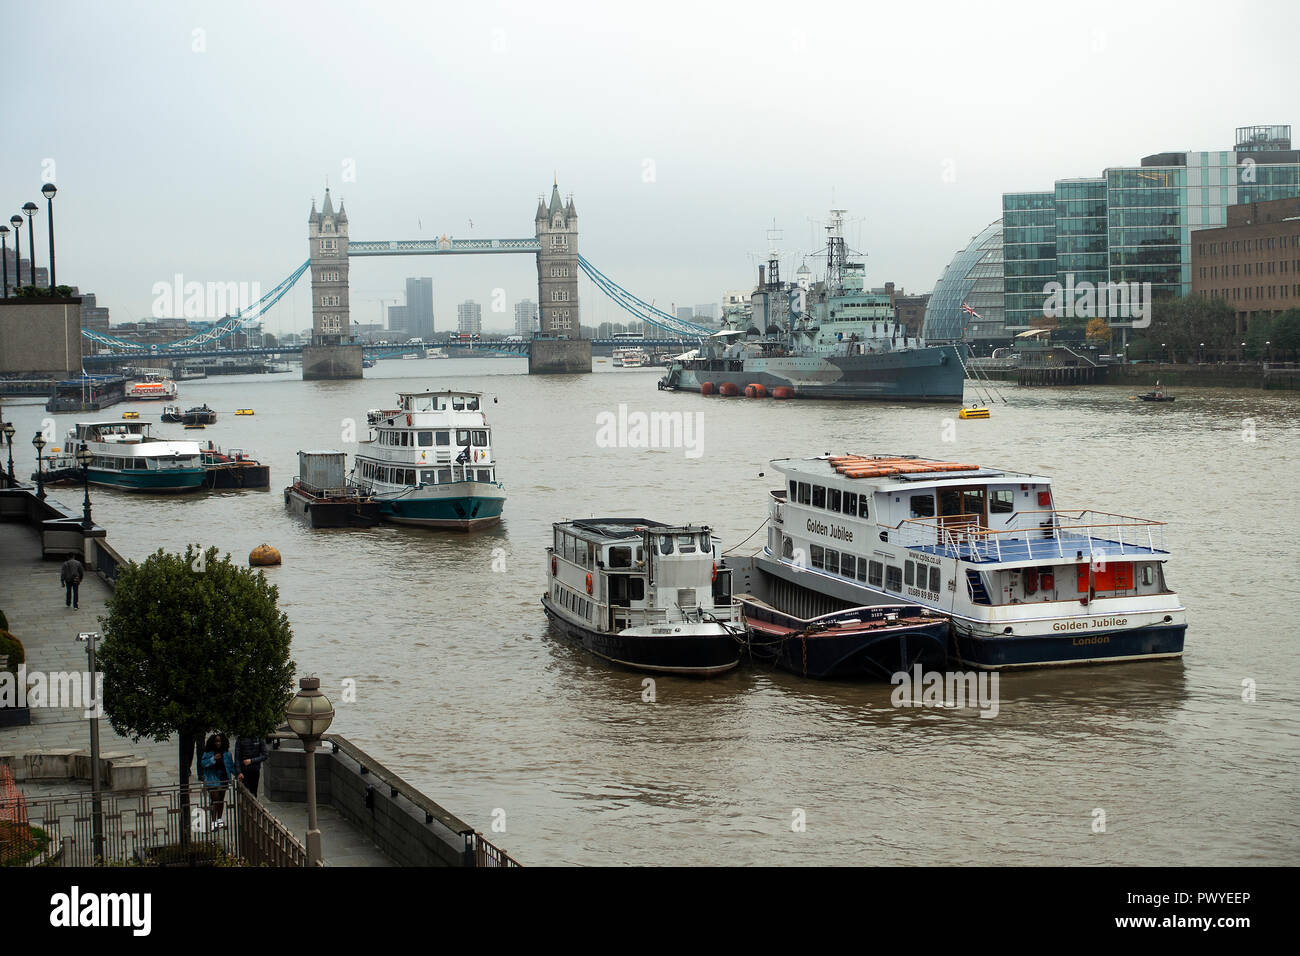 Tourist and Party Boats Moored in the River Thames with HMS Belfast and Tower Bridge in the Background London England United Kingdom UK Stock Photo